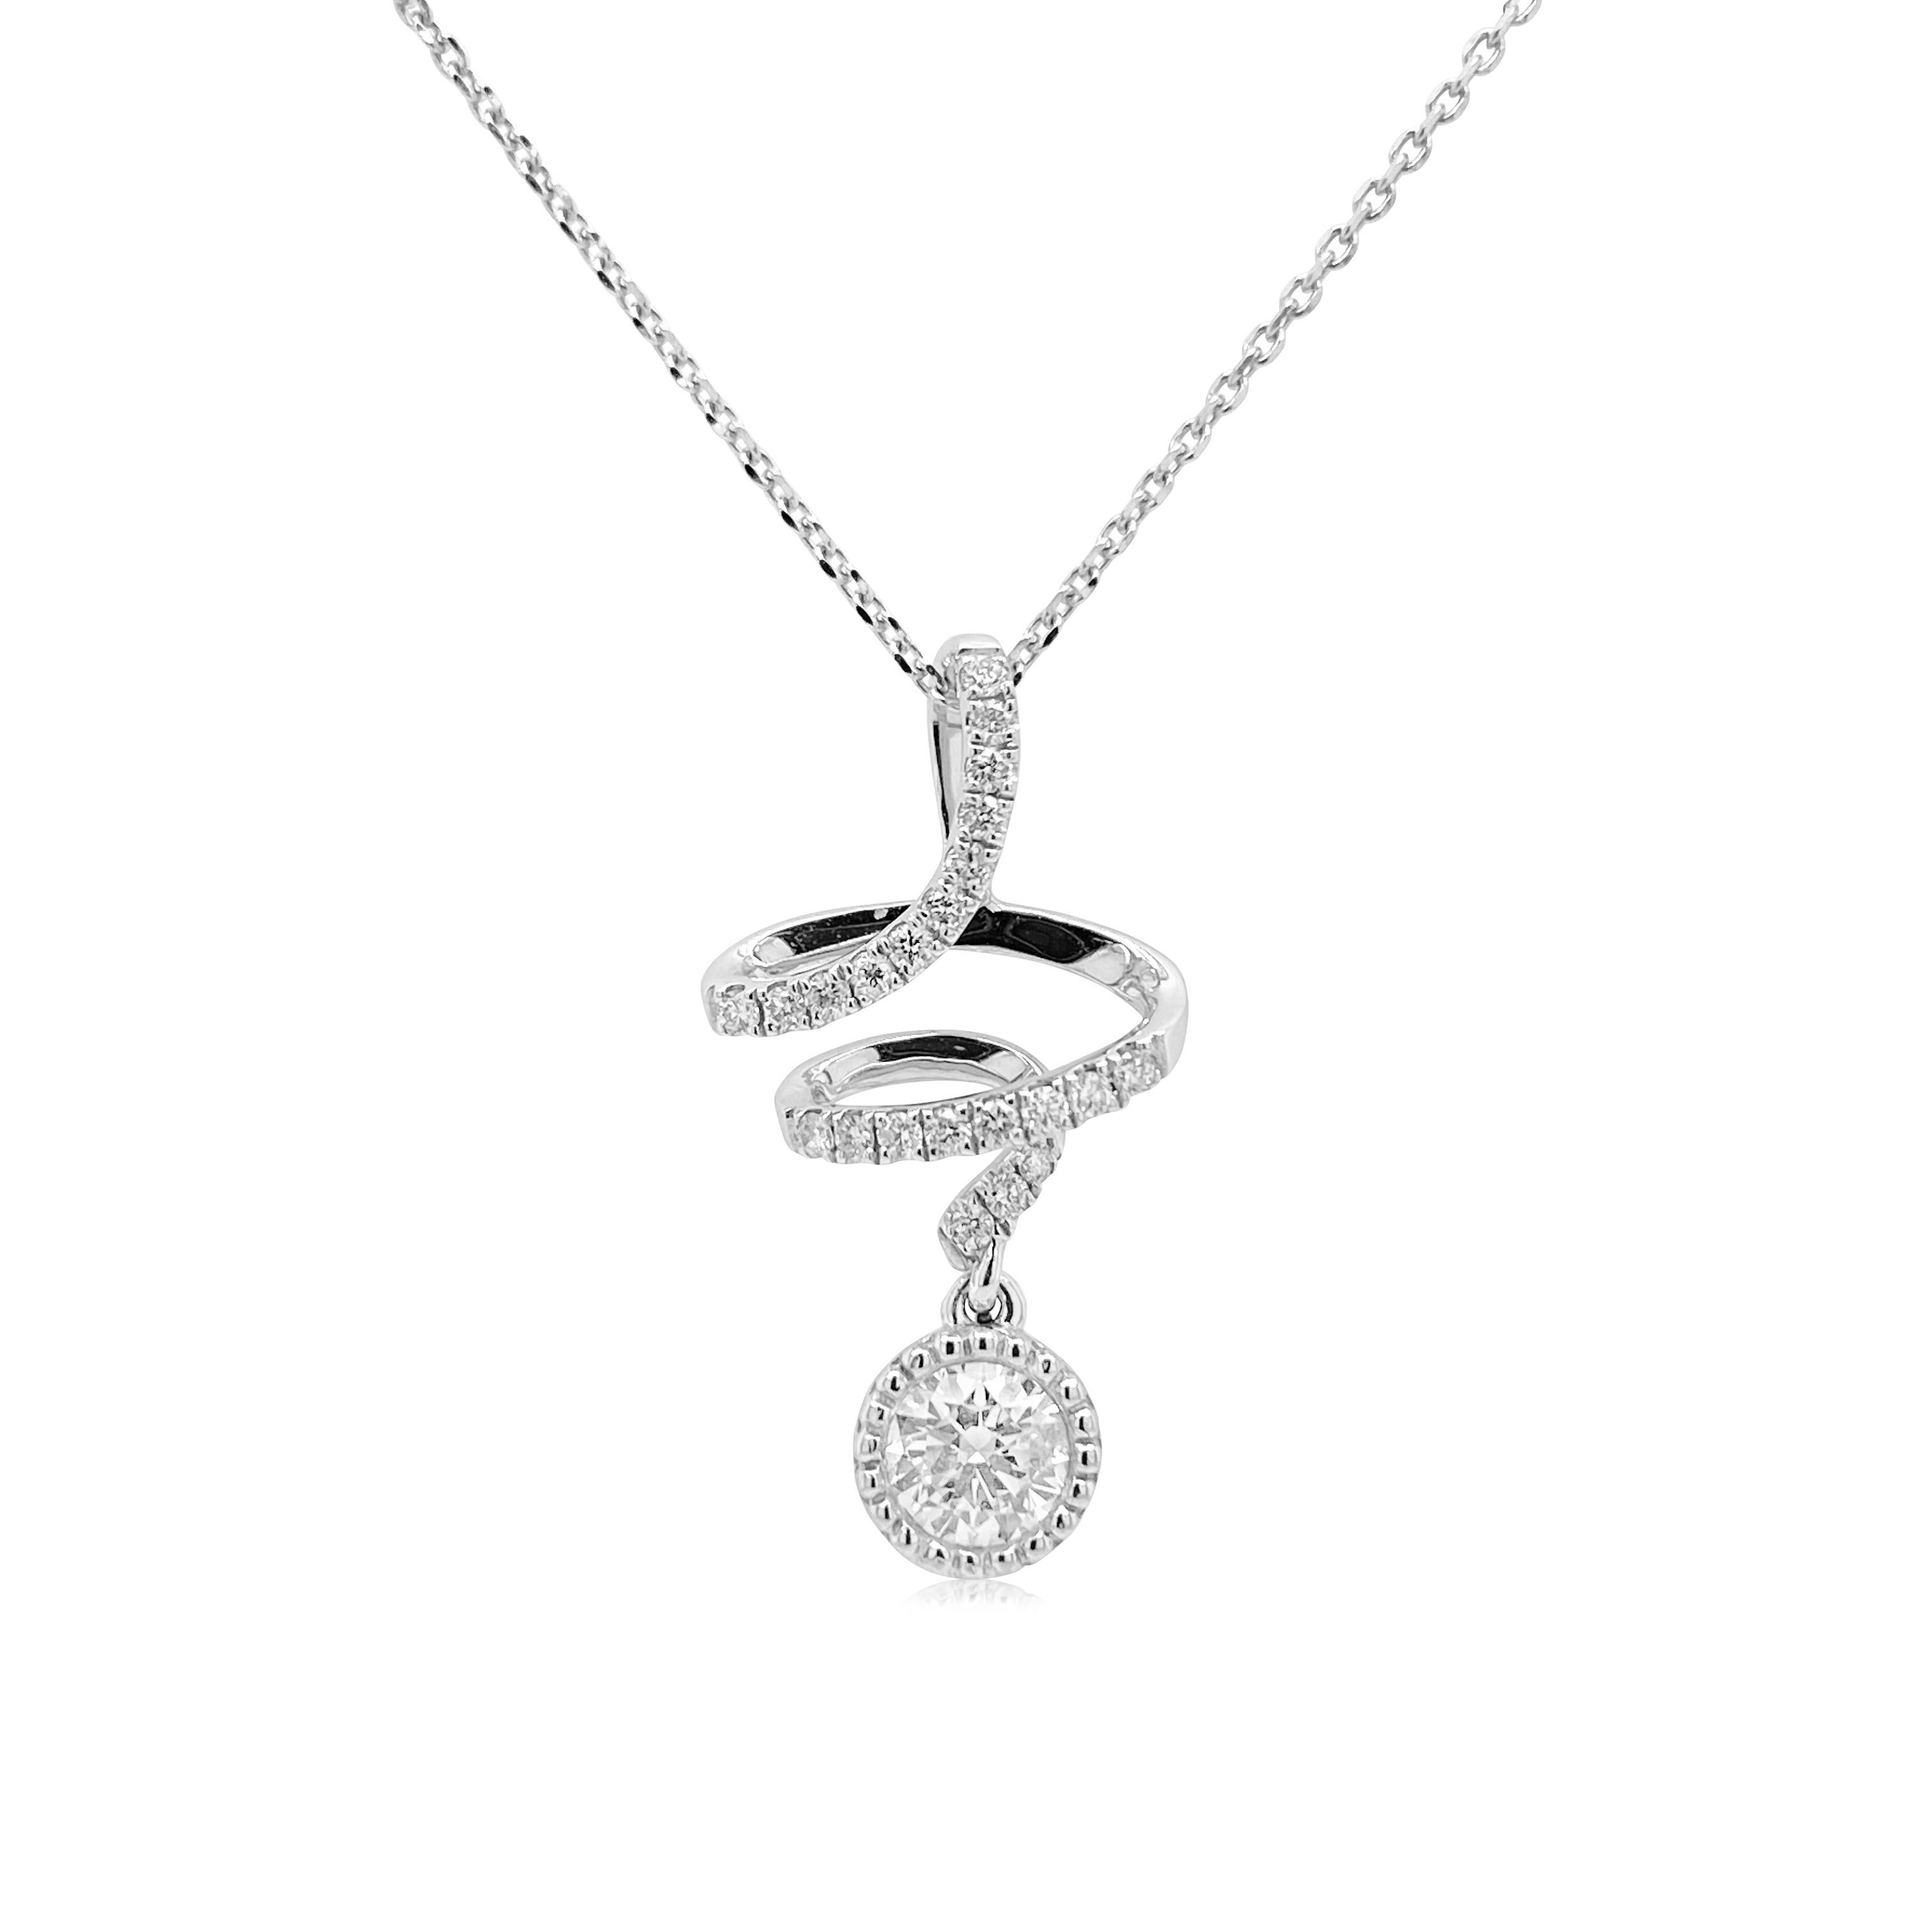 This beautiful and contemporary pendant is a sleek addition to your everyday jewelry collection. Comes with a Platinum chain.

-	Round Brilliant Cut White Diamond total 0.30 carat (DGL, Japan certified)
-	Round Brilliant Cut White Diamonds total